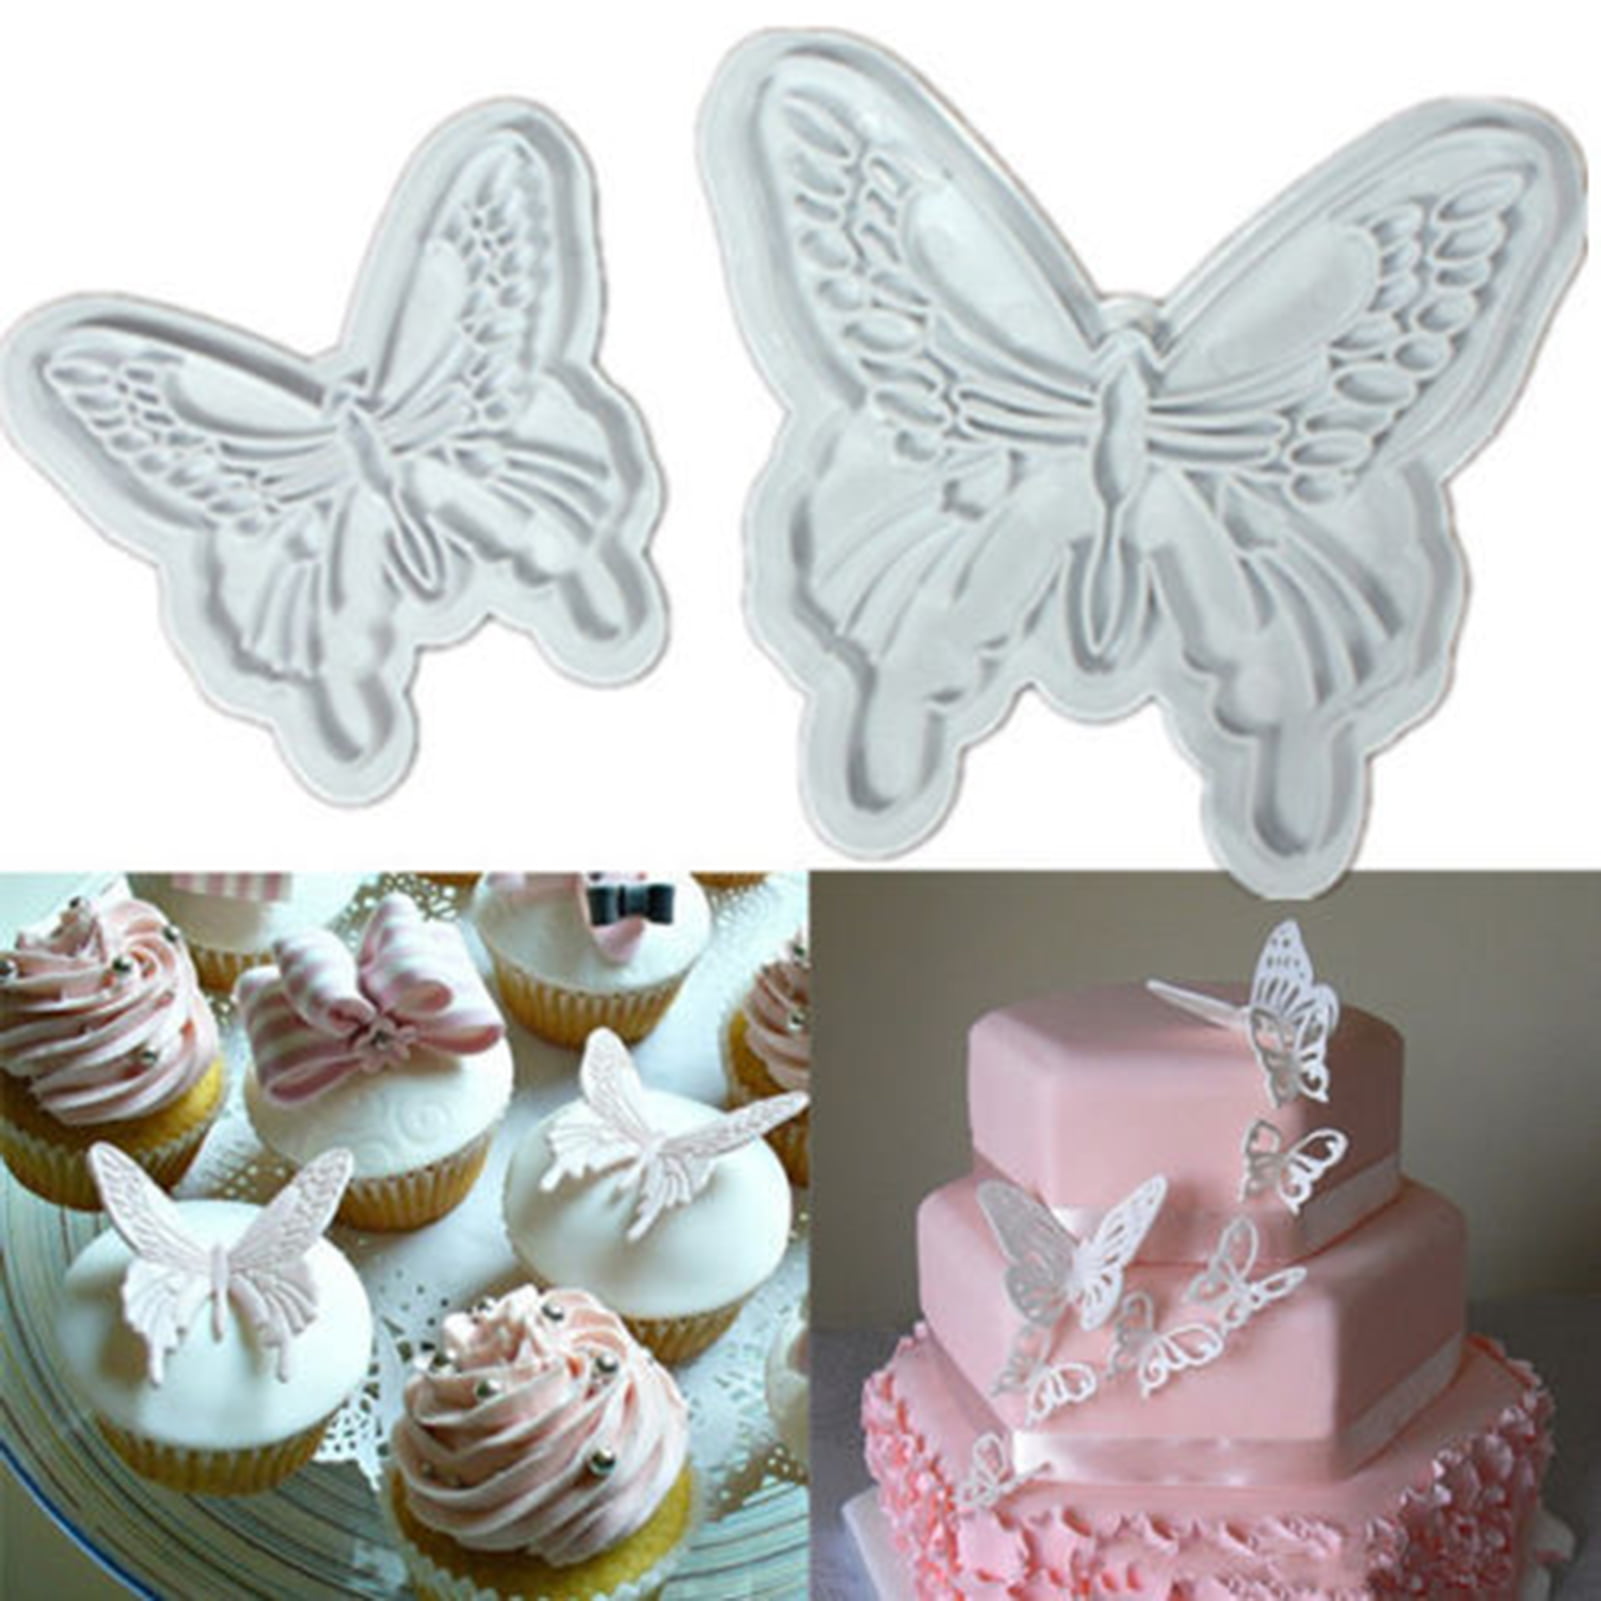 WE CAN COOK CHILDRENS KIDS SILICONE CAKE JELLY MOULDS BUTTERFLY & TEDDY 2pc SET 